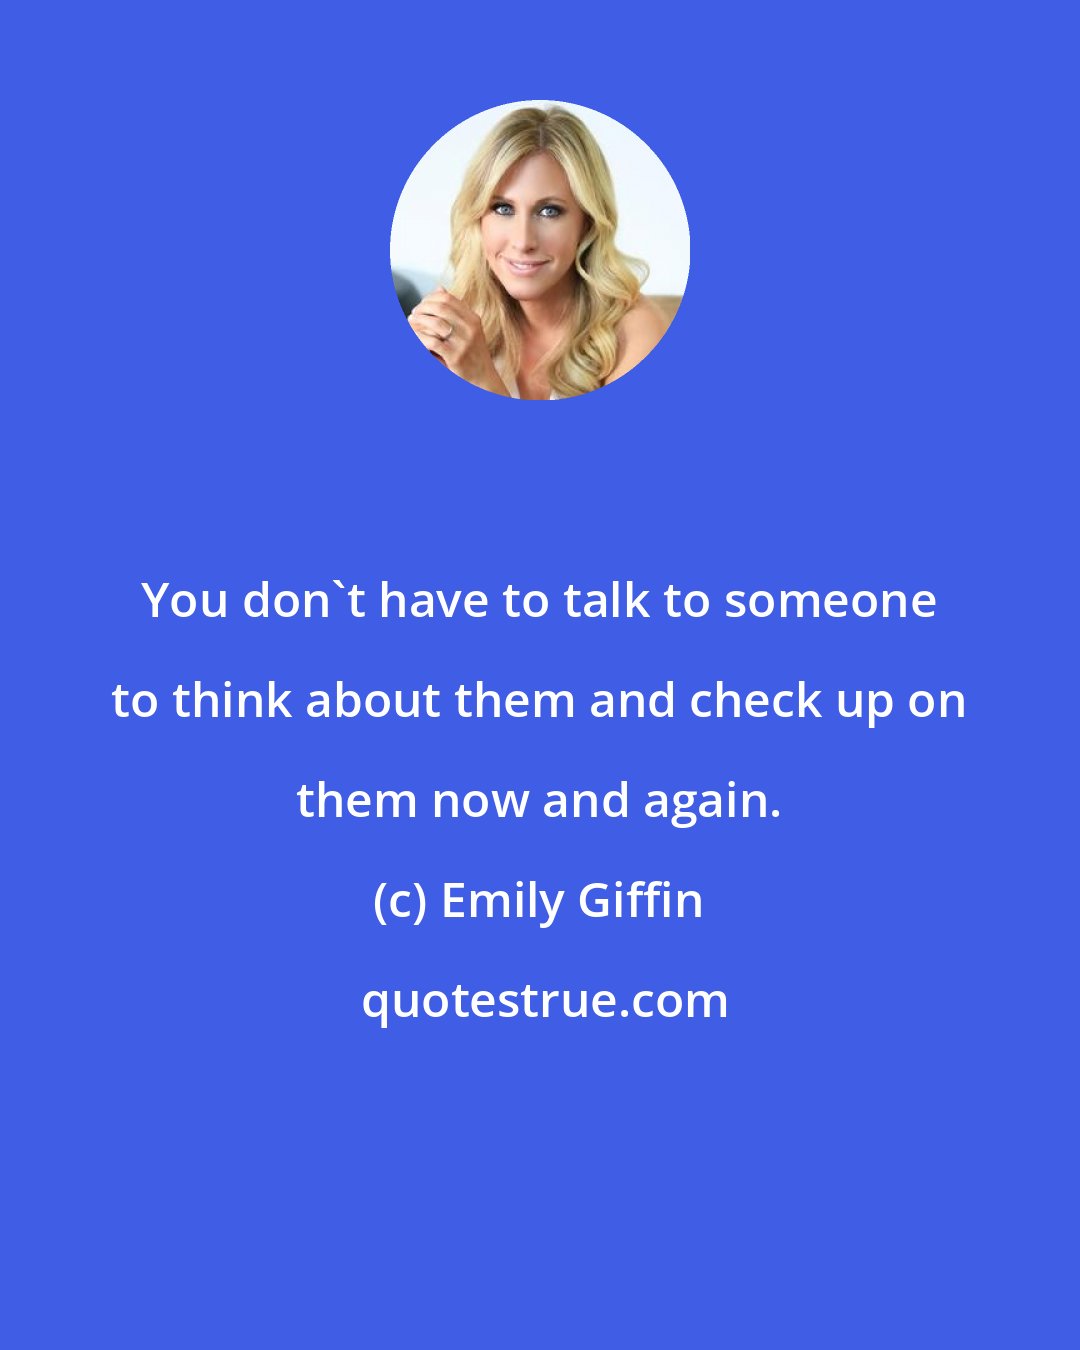 Emily Giffin: You don't have to talk to someone to think about them and check up on them now and again.